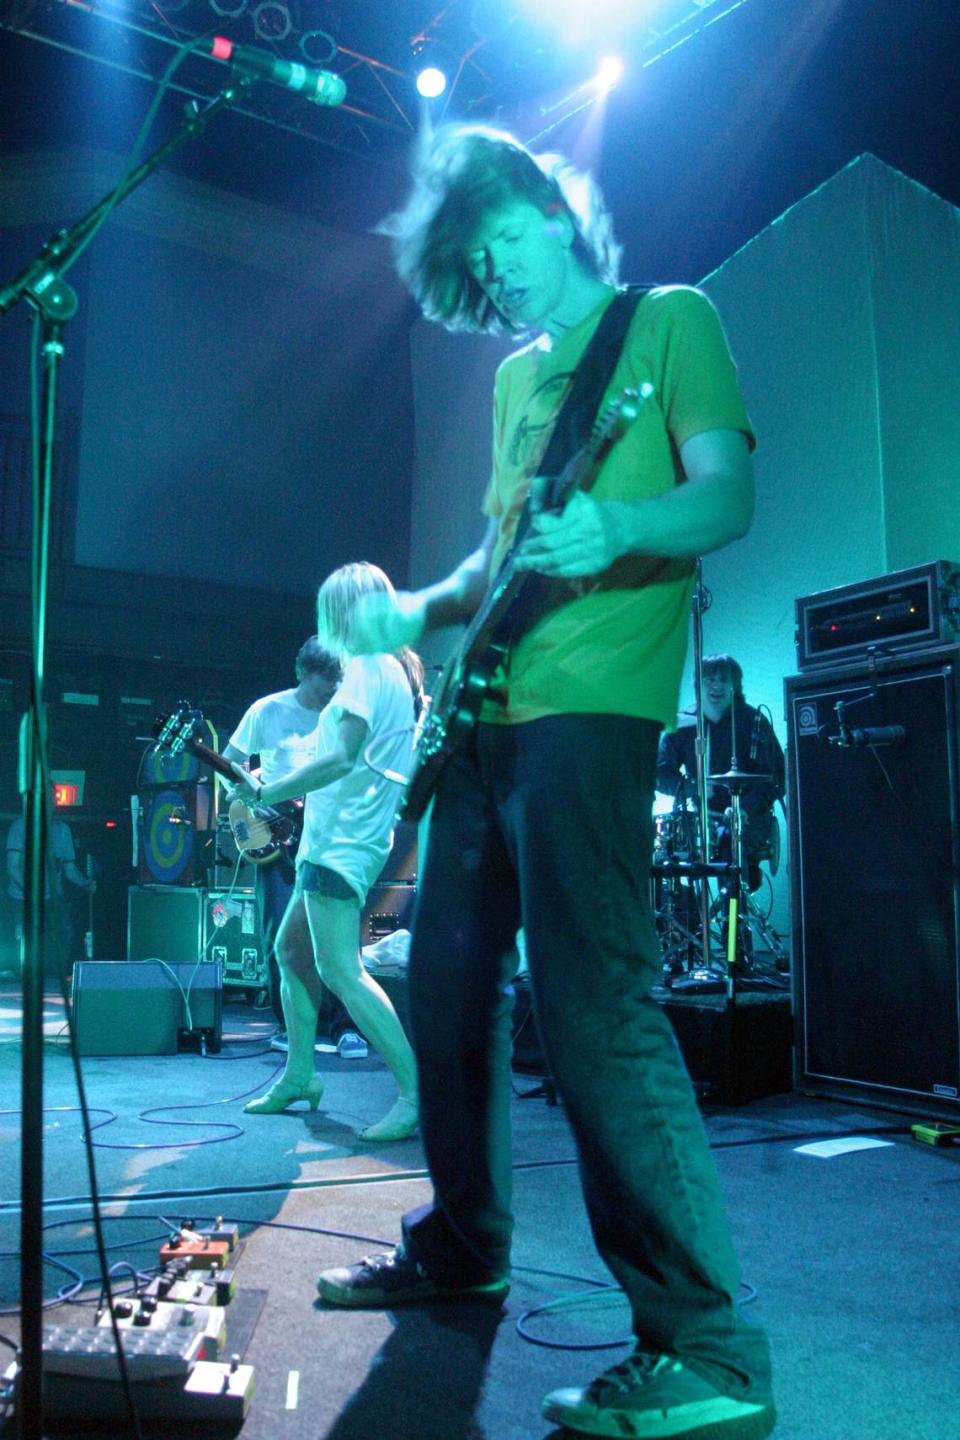 Guitarist Thurston Moore, bassist Kim Gordon and drummer Steve Shelley perform during a Sonic Youth concert in Washington, D.C., in 2005, when the band celebrated its 25th anniversary.